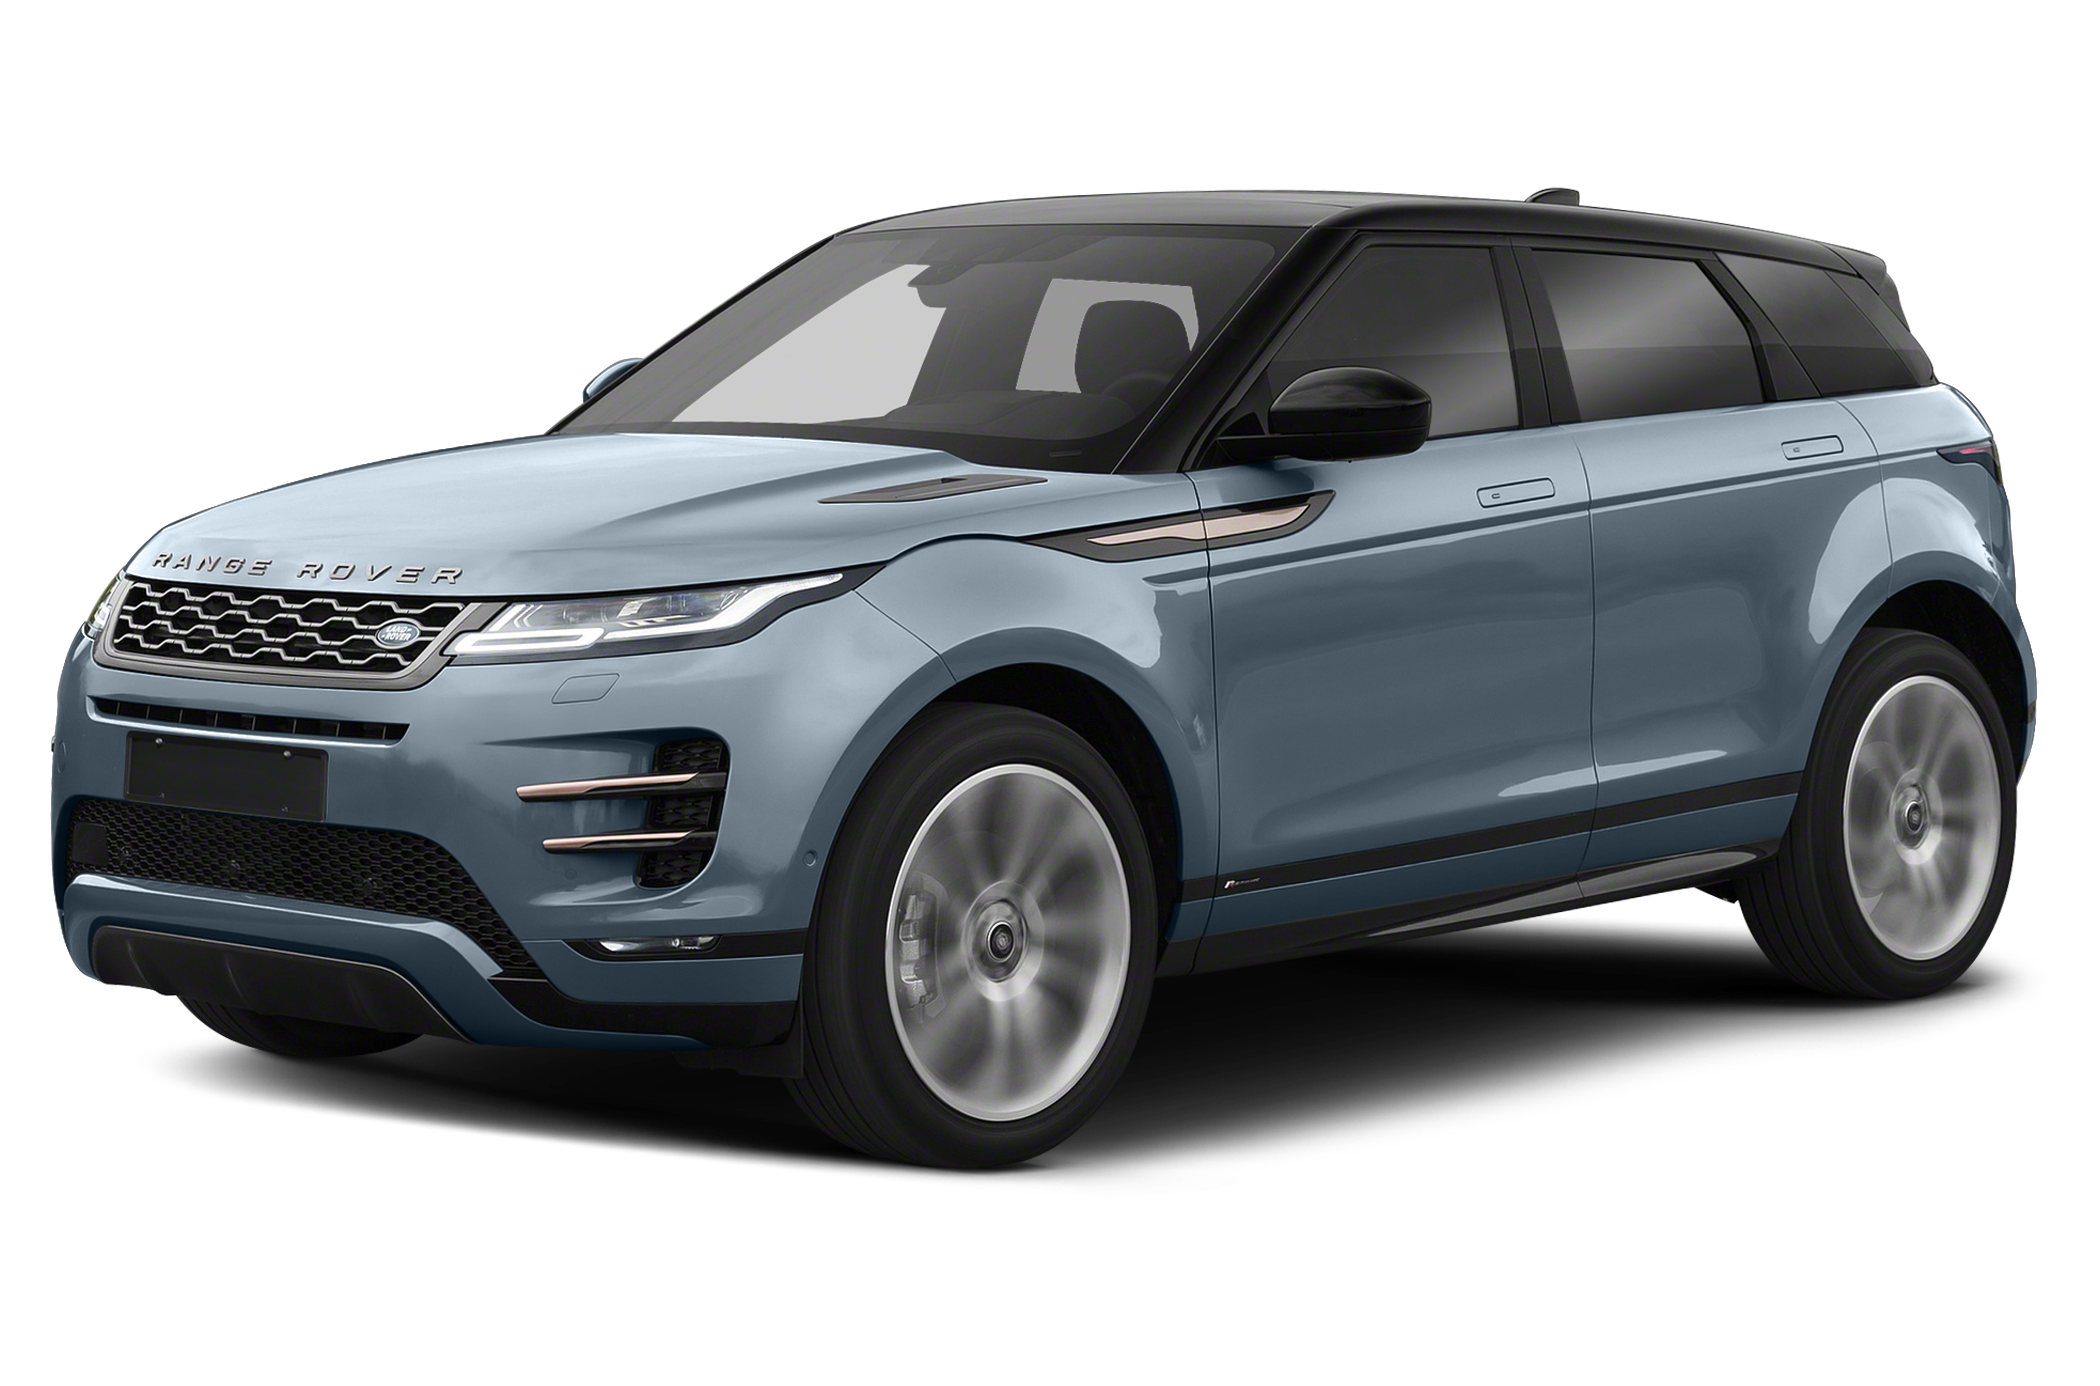 2020 Land Rover Range Rover Evoque AWD S 4dr SUV at Rs 500000/piece, Used  Cars in Bengaluru